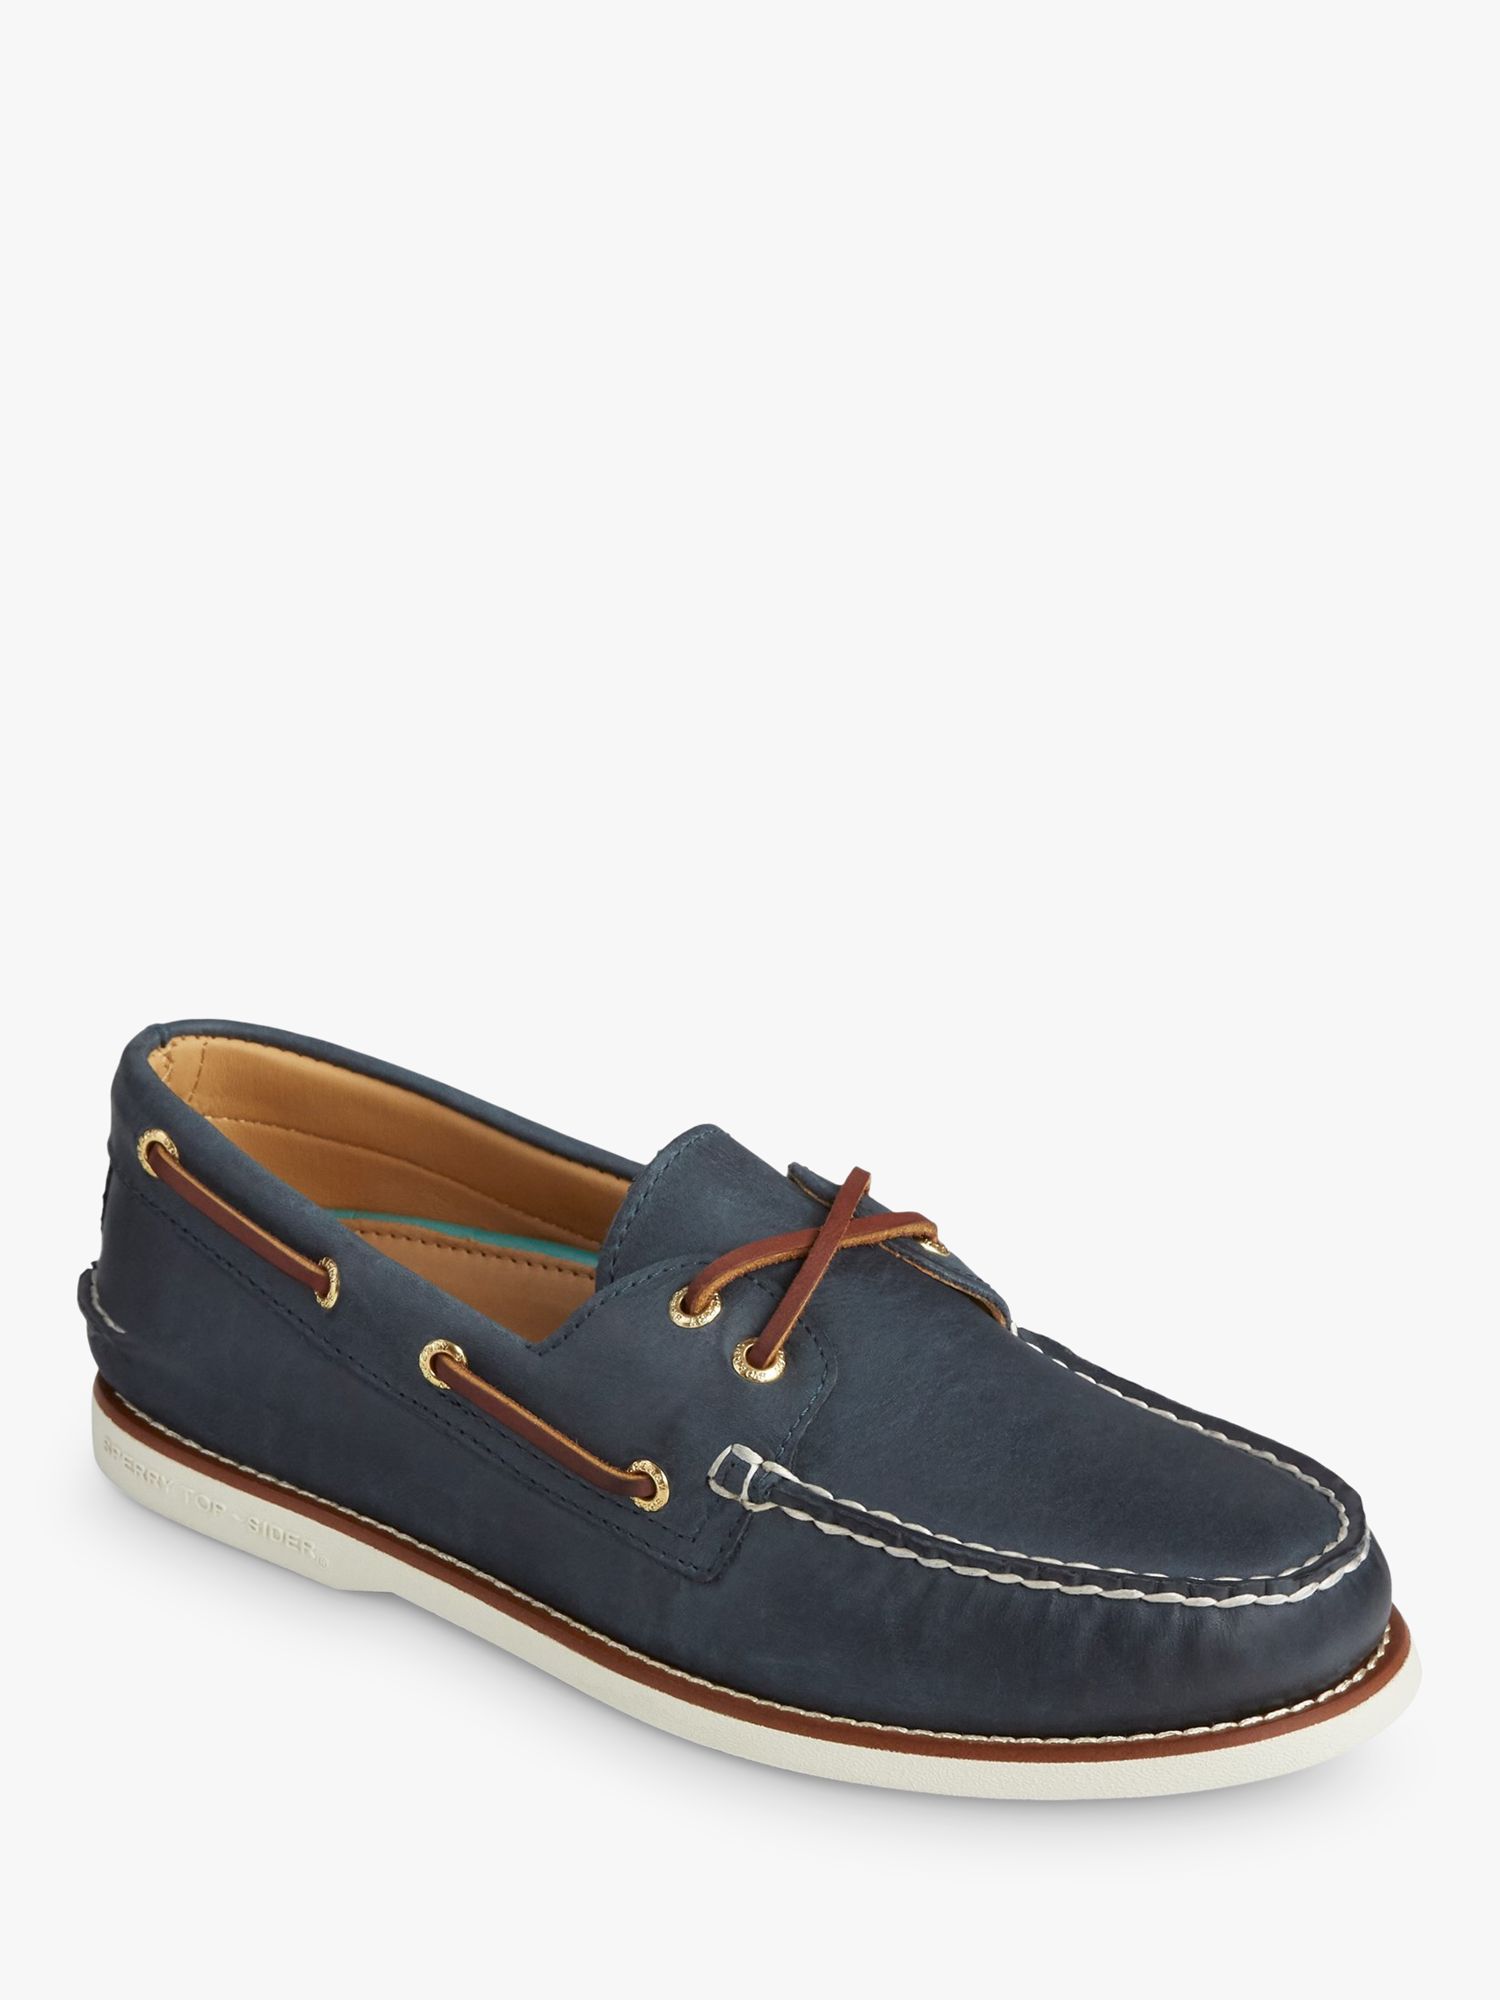 Sperry Gold Cup Authentic Original Leather Boat Shoes, Navy, 8.5